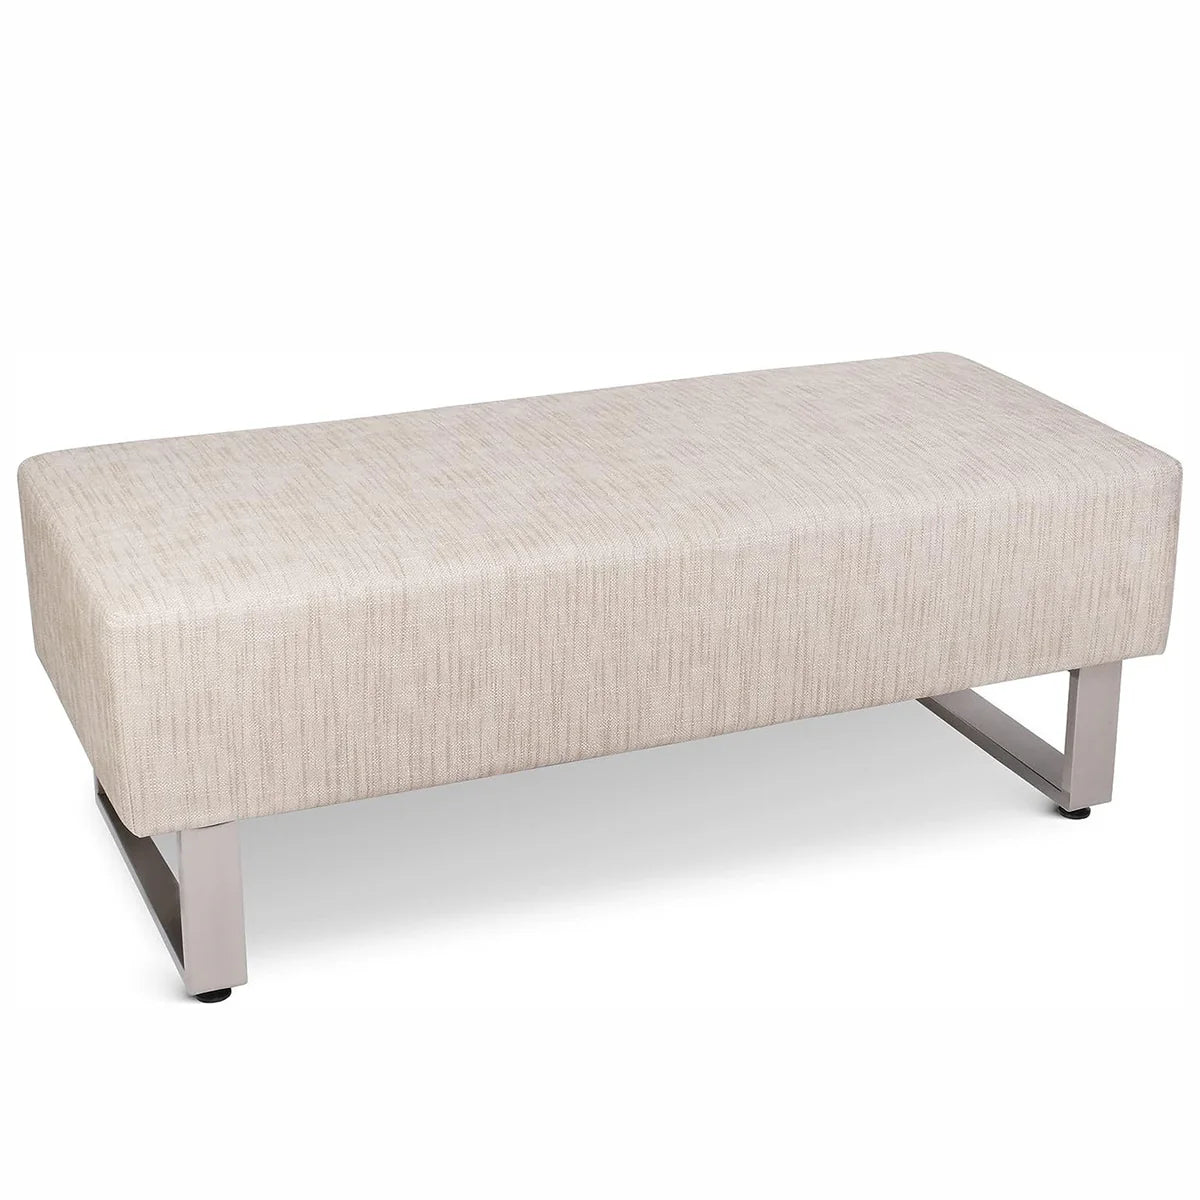 47"L Modern PU Leather Dining Room Bench Upholstered Padded Seat, Beige